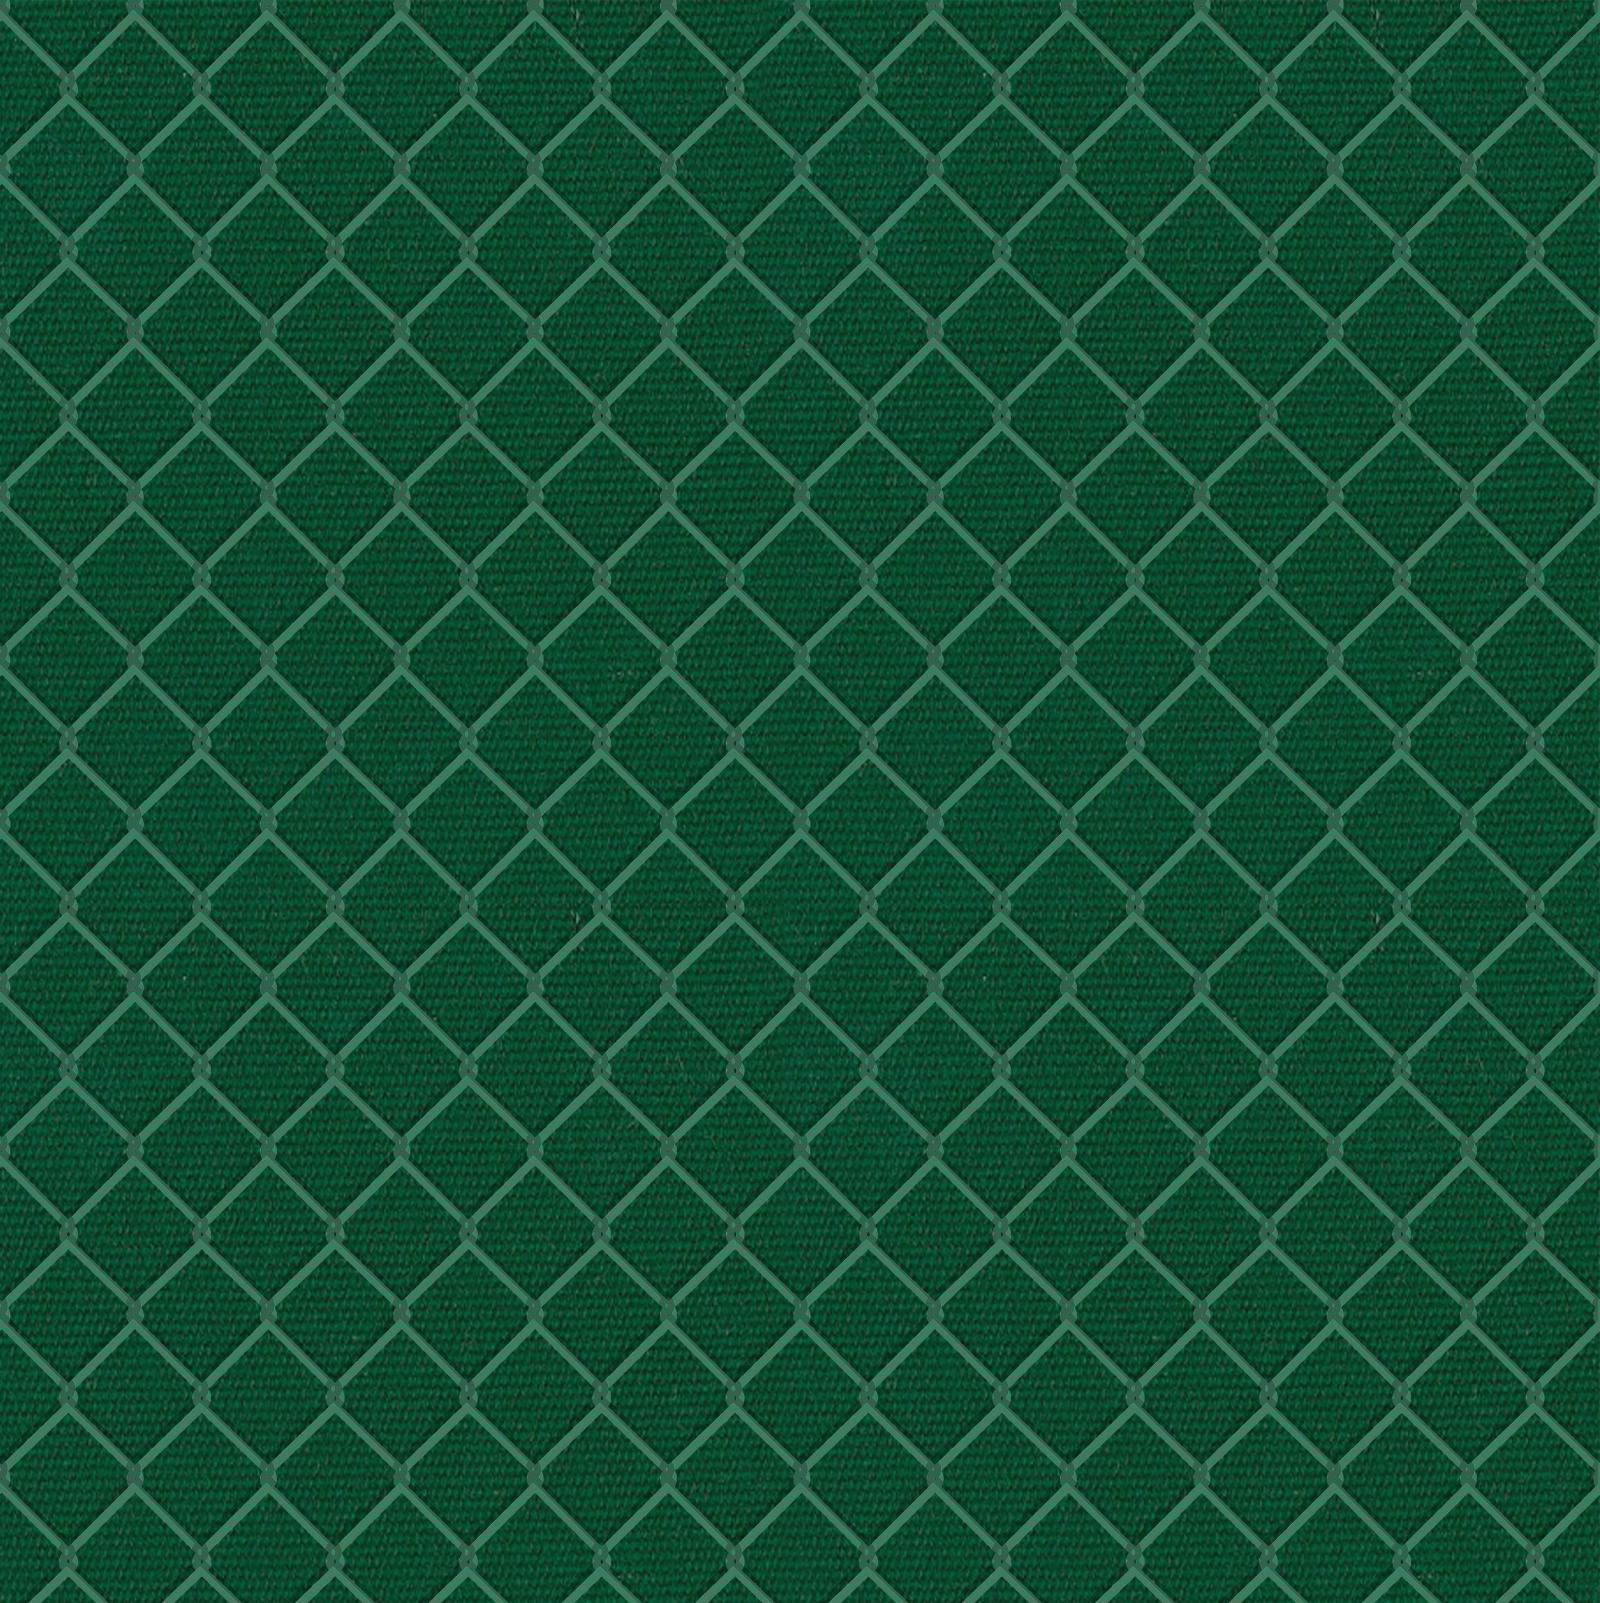 Green wire fence graphic